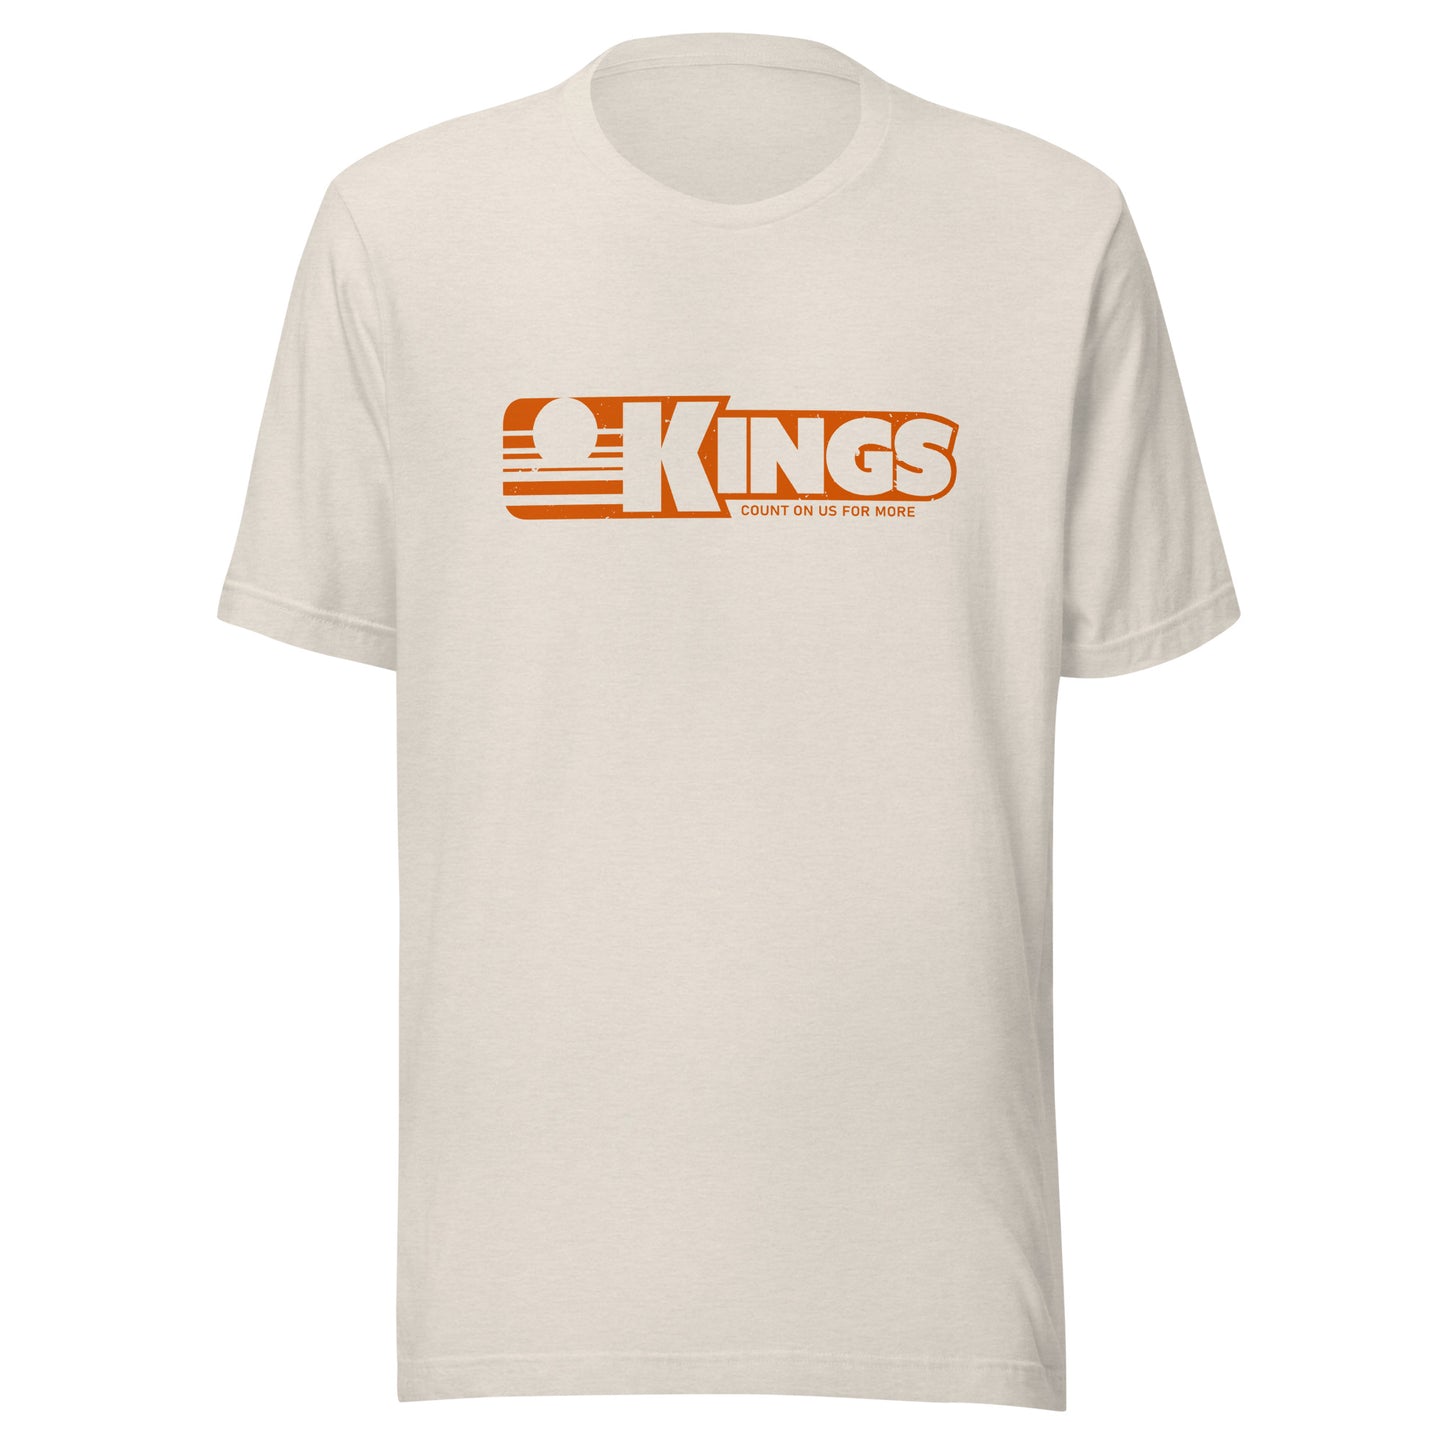 King's Department Store Retro T-Shirt - Vintage Mens & Womens Graphic Tee